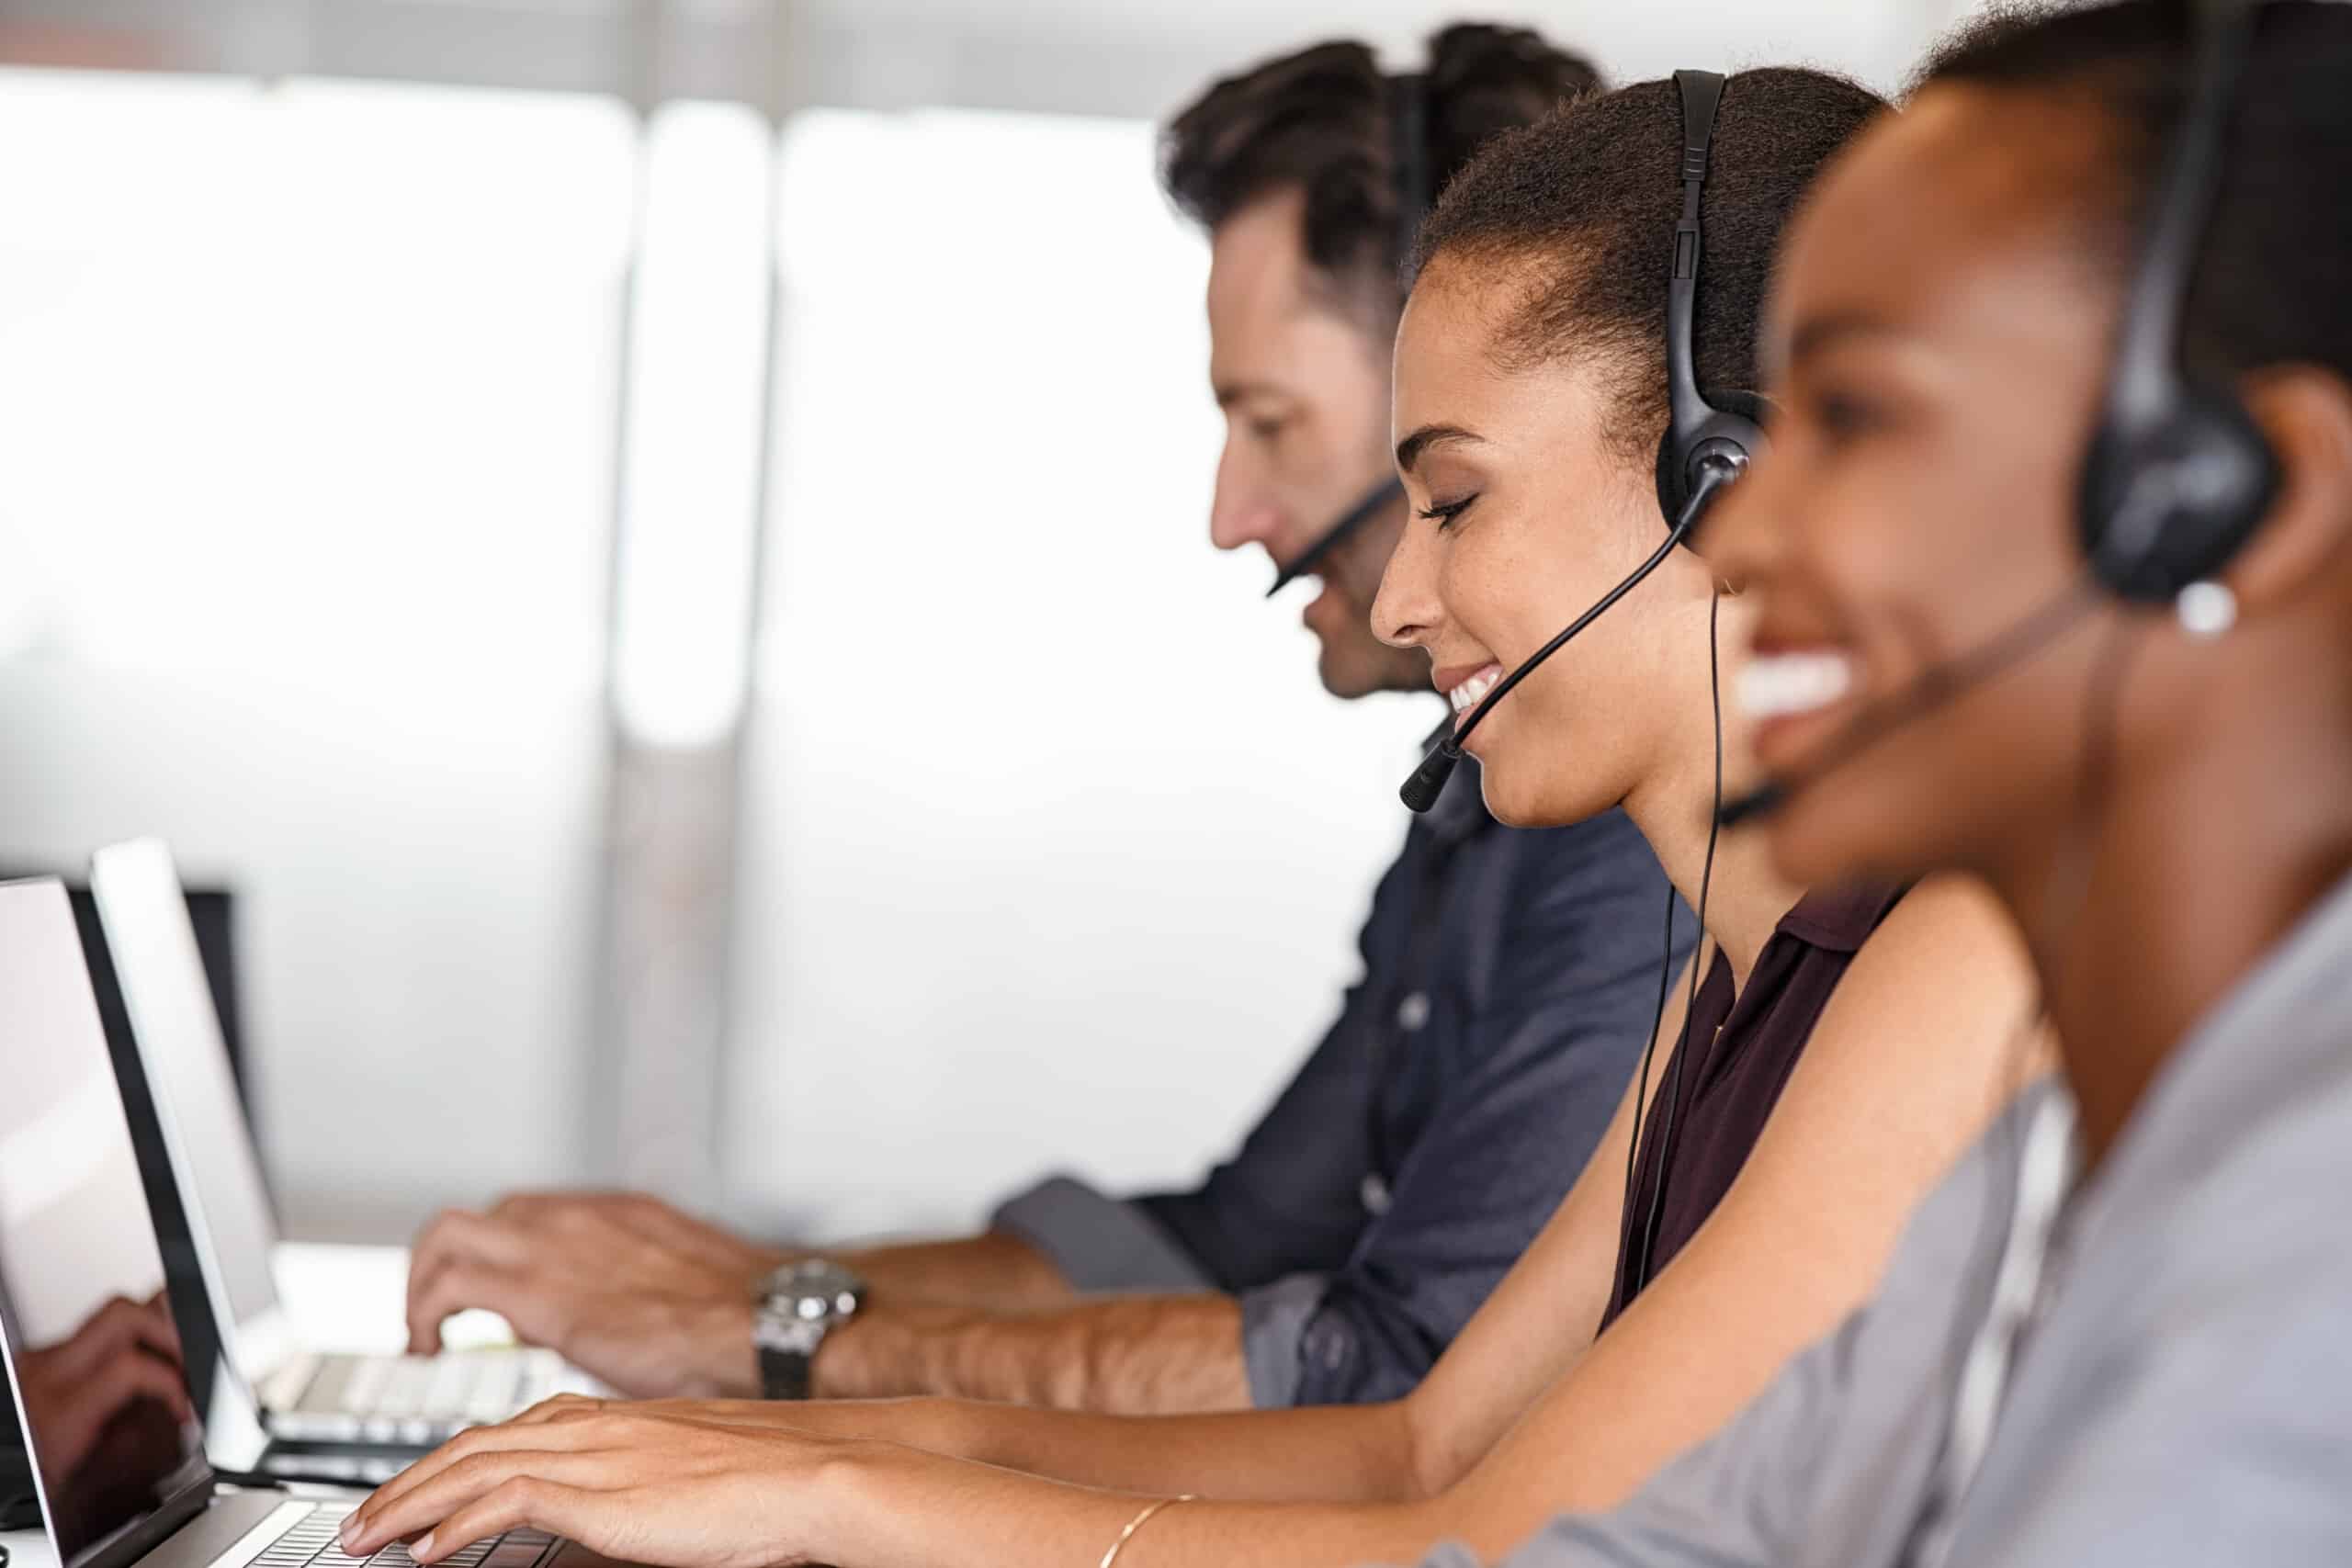 Customer service agents on call using managed services